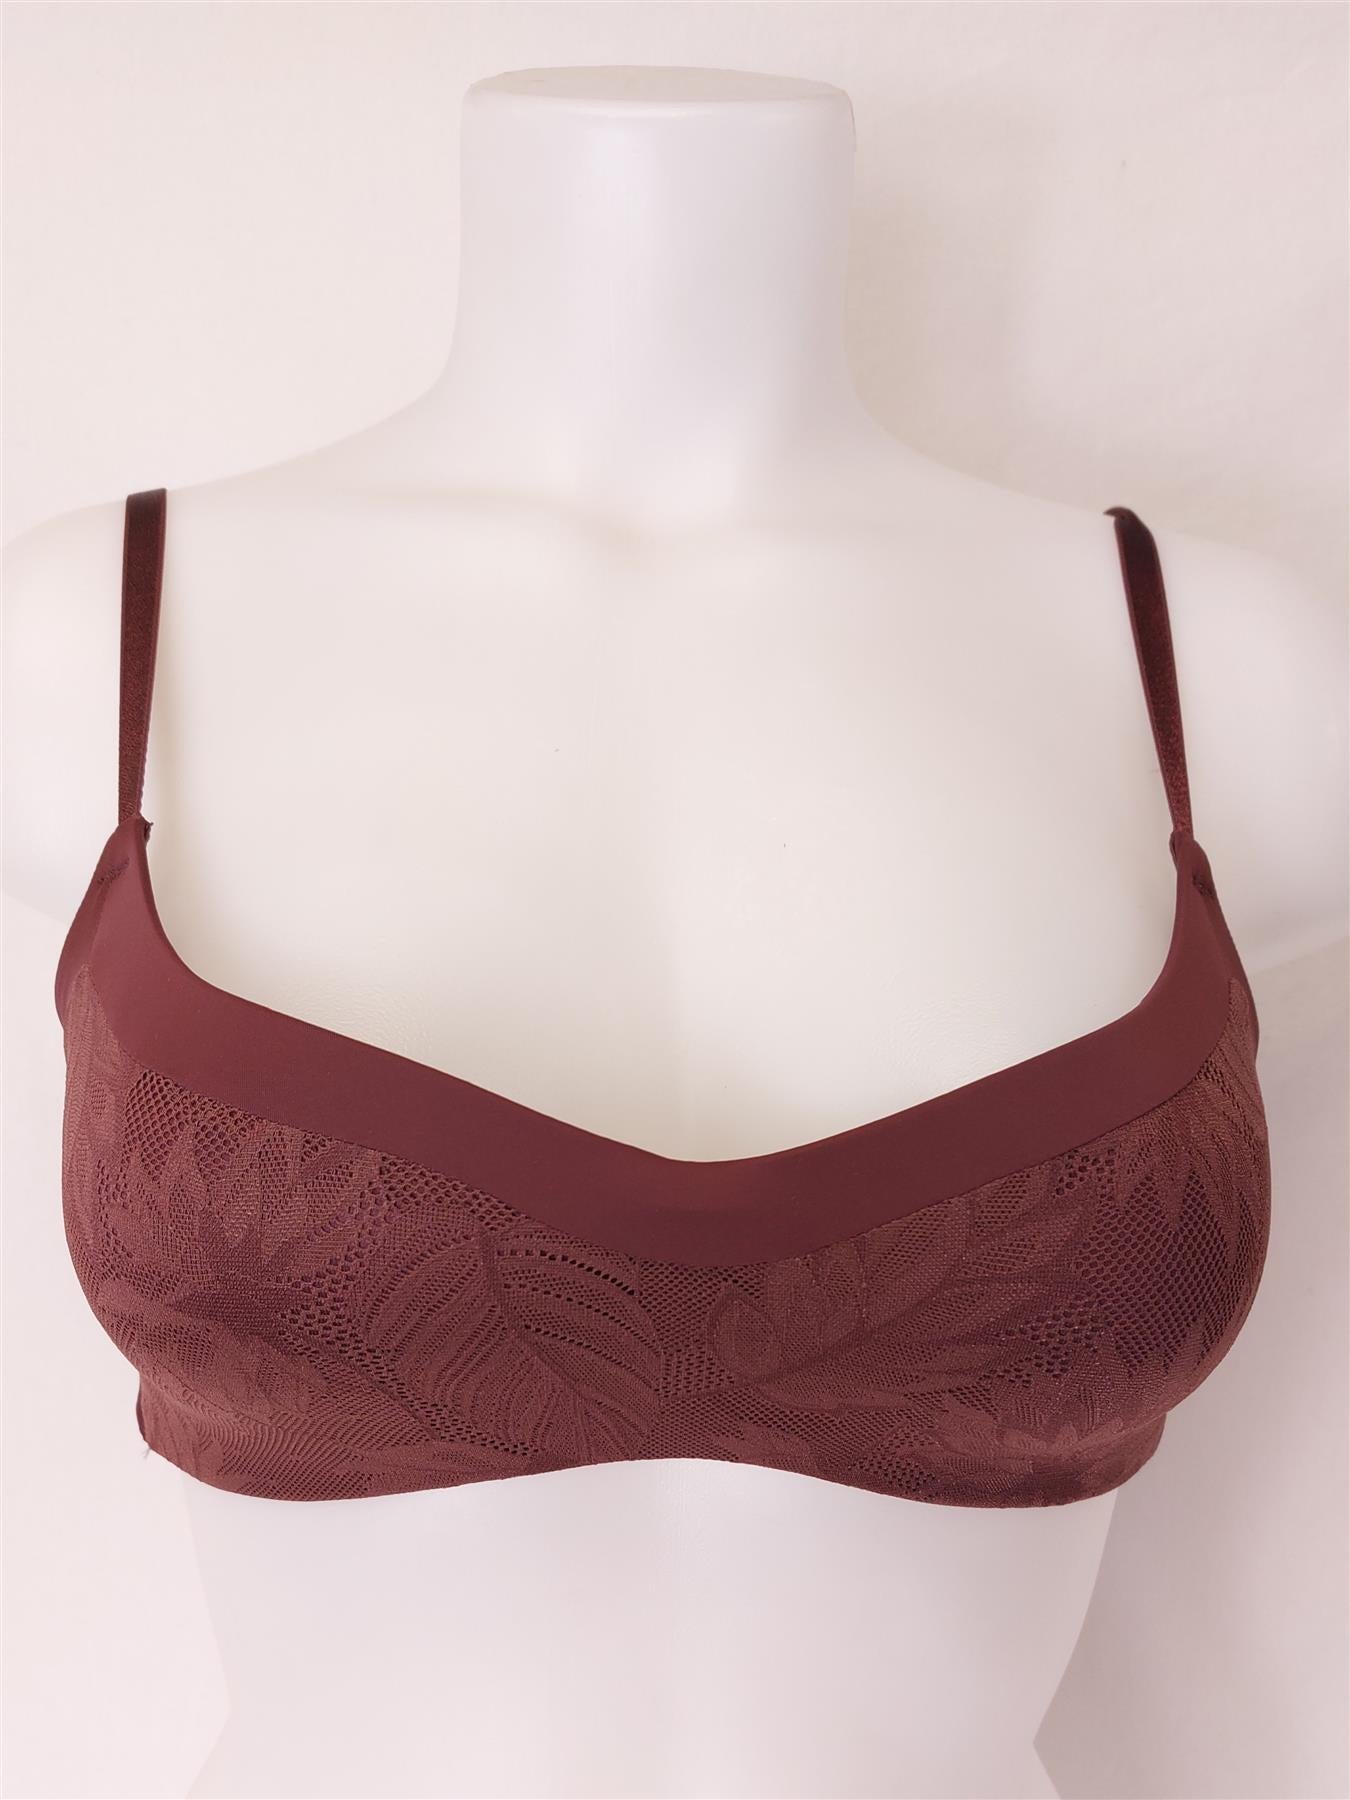 Designer Non-Wired Bra Microfibre All-Over Lace Lightly Padded Brand New